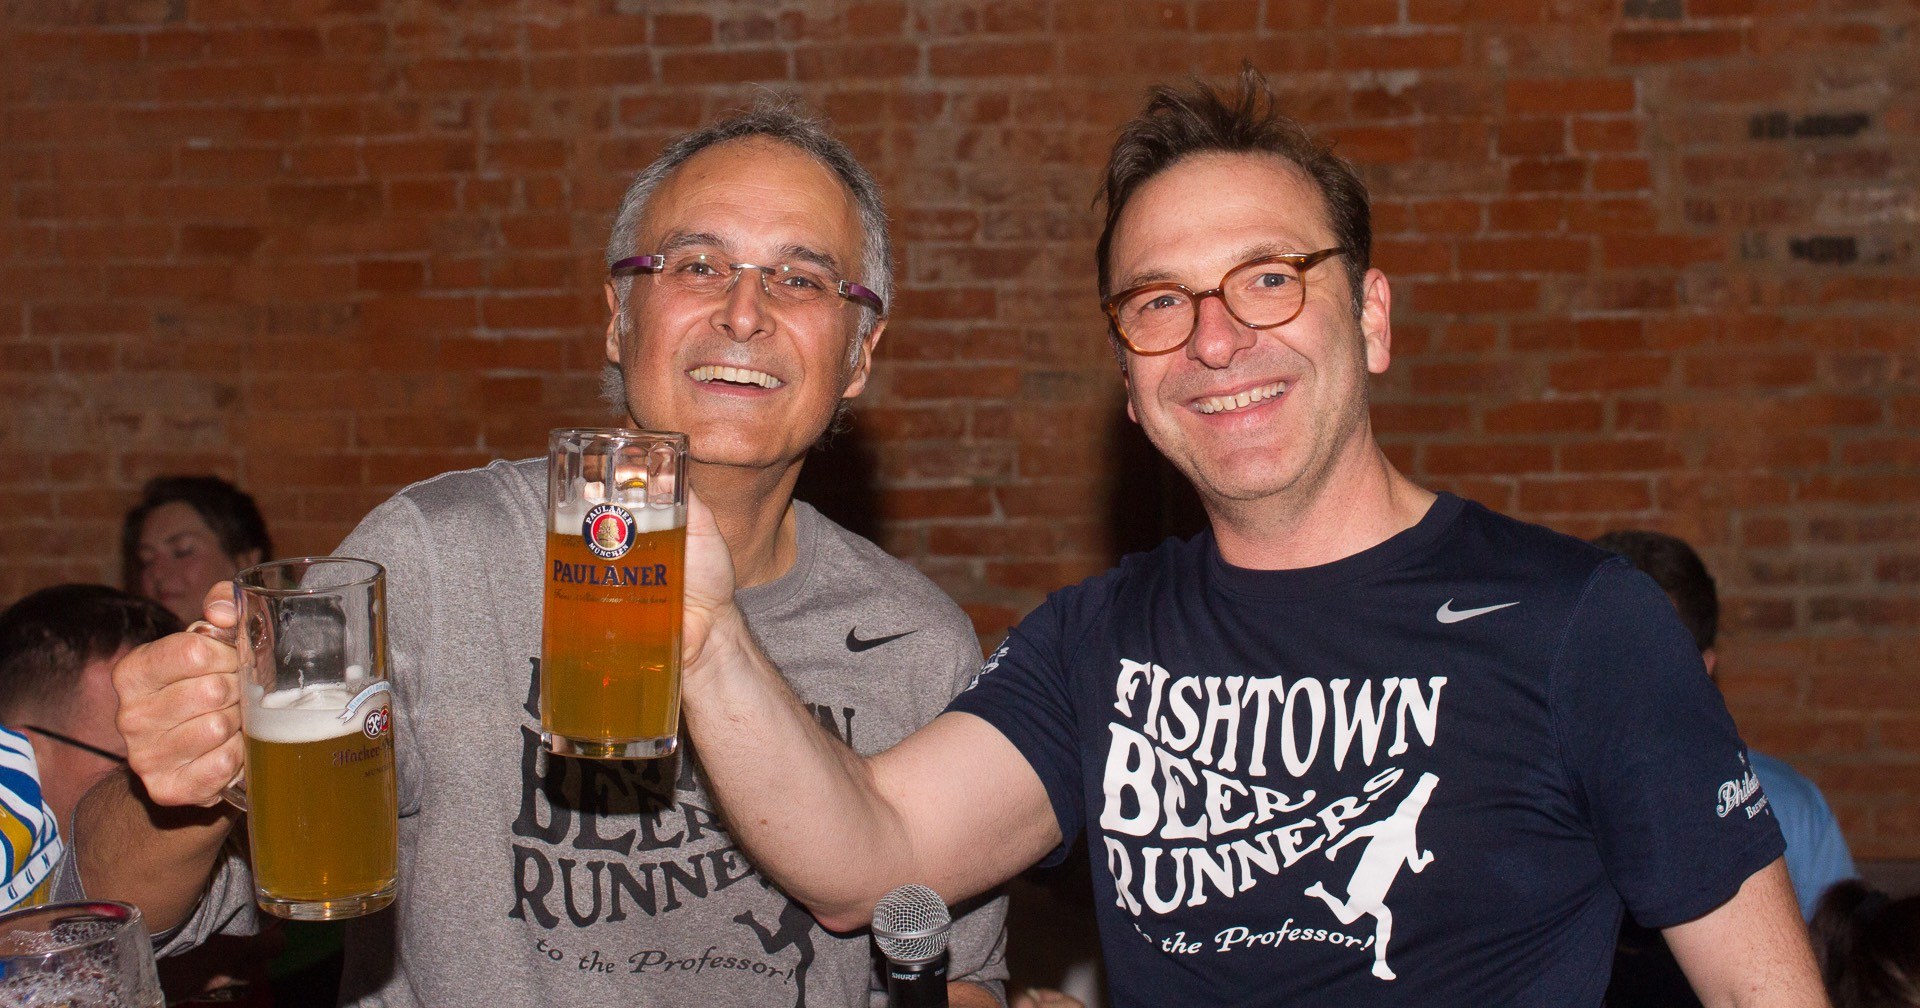 Learn About Why You Should Drink Beer After Running at This Summit